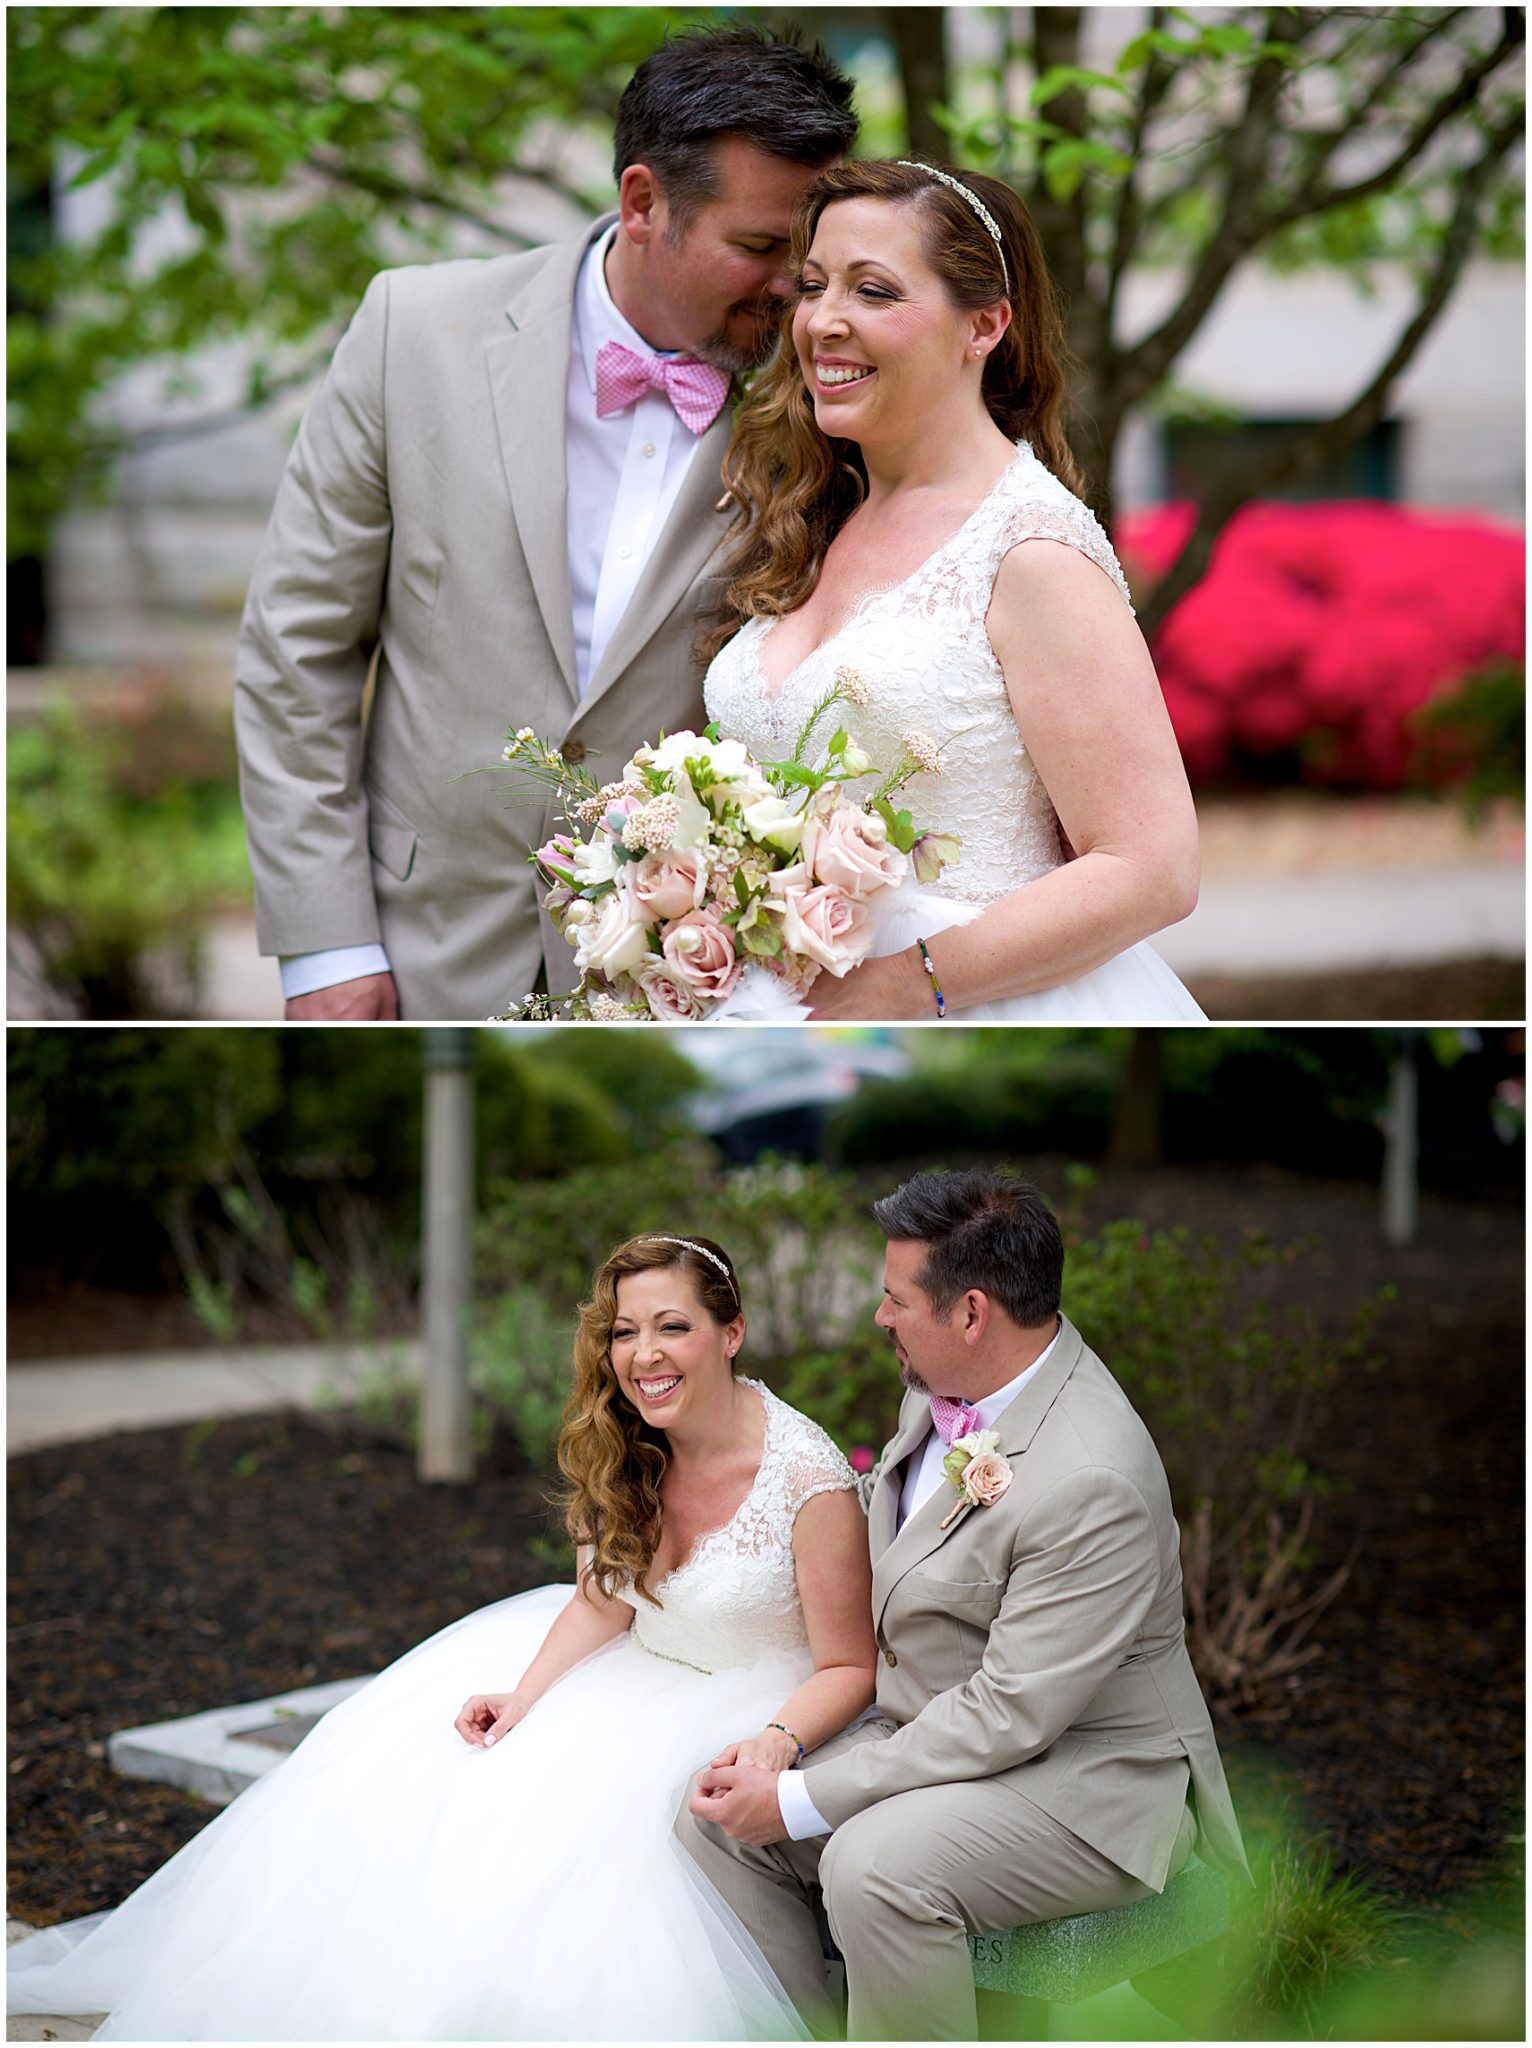 Mandi Mitchell Photography, Old Decatur Courthouse Wedding